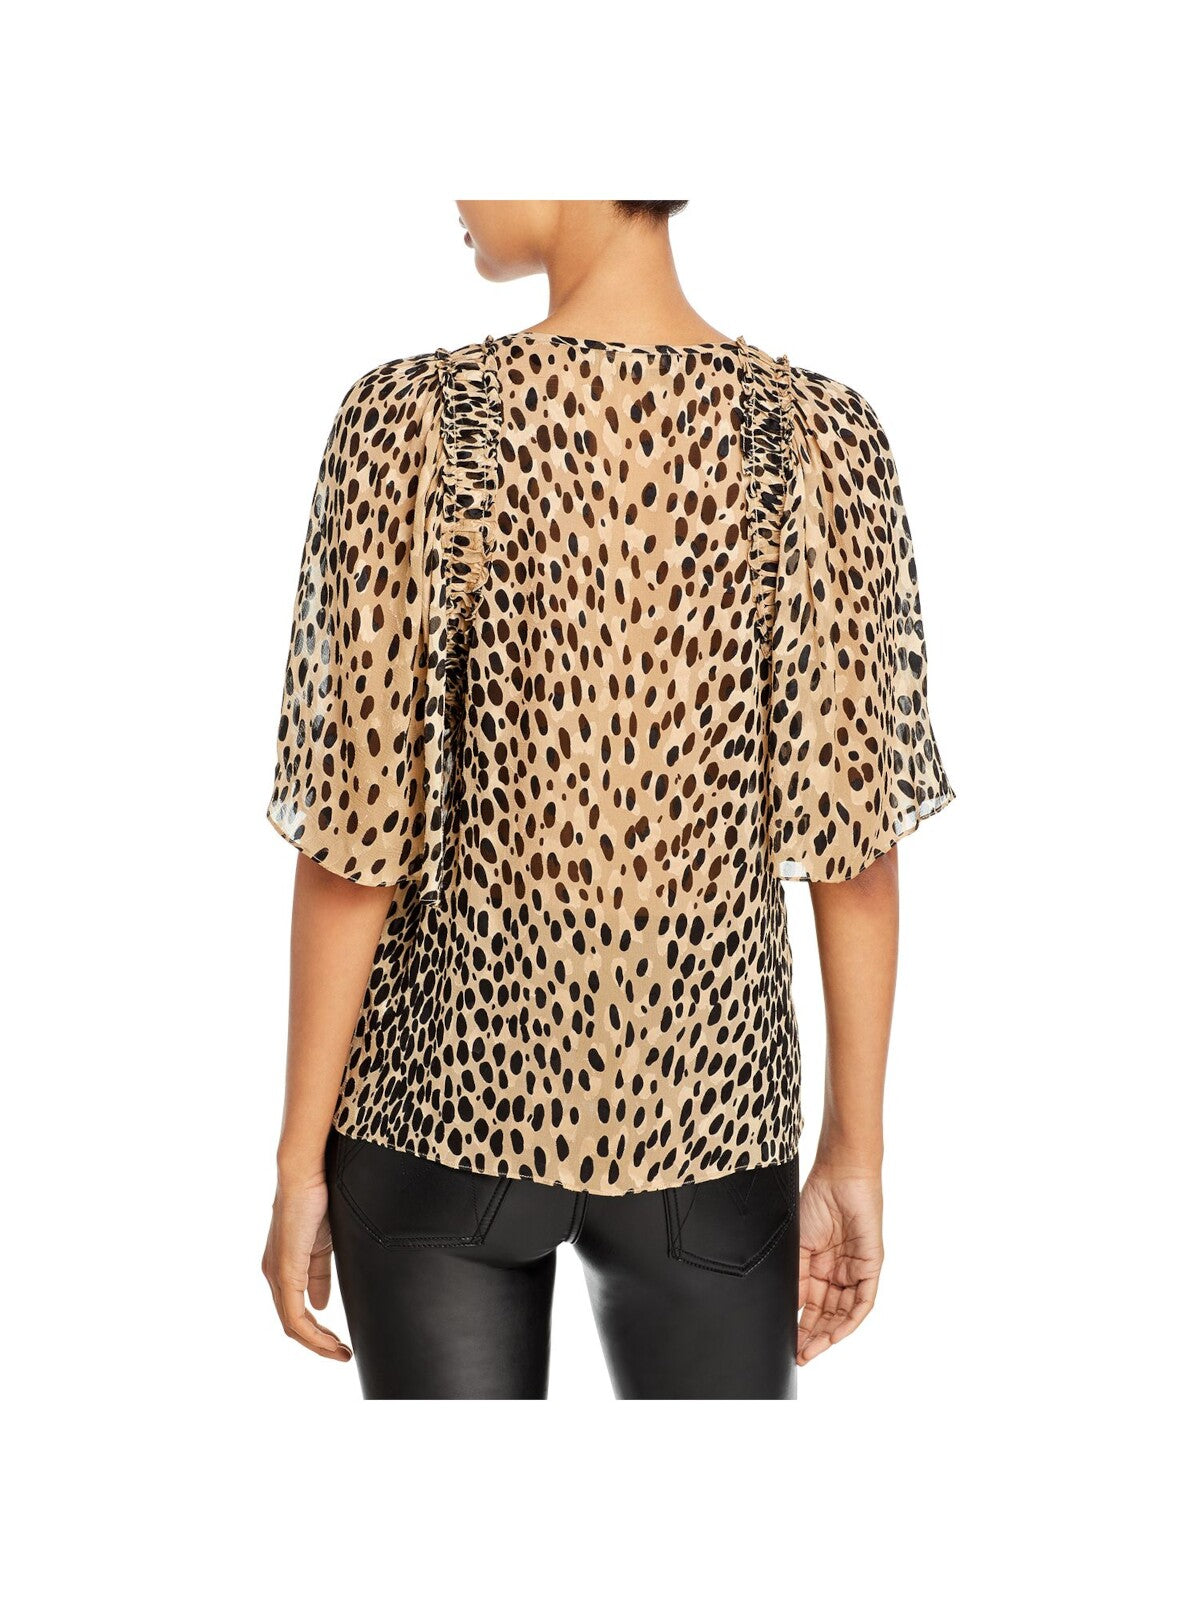 REBECCA TAYLOR Womens Brown Smocked Sheer Animal Print Elbow Sleeve Keyhole Evening Top S